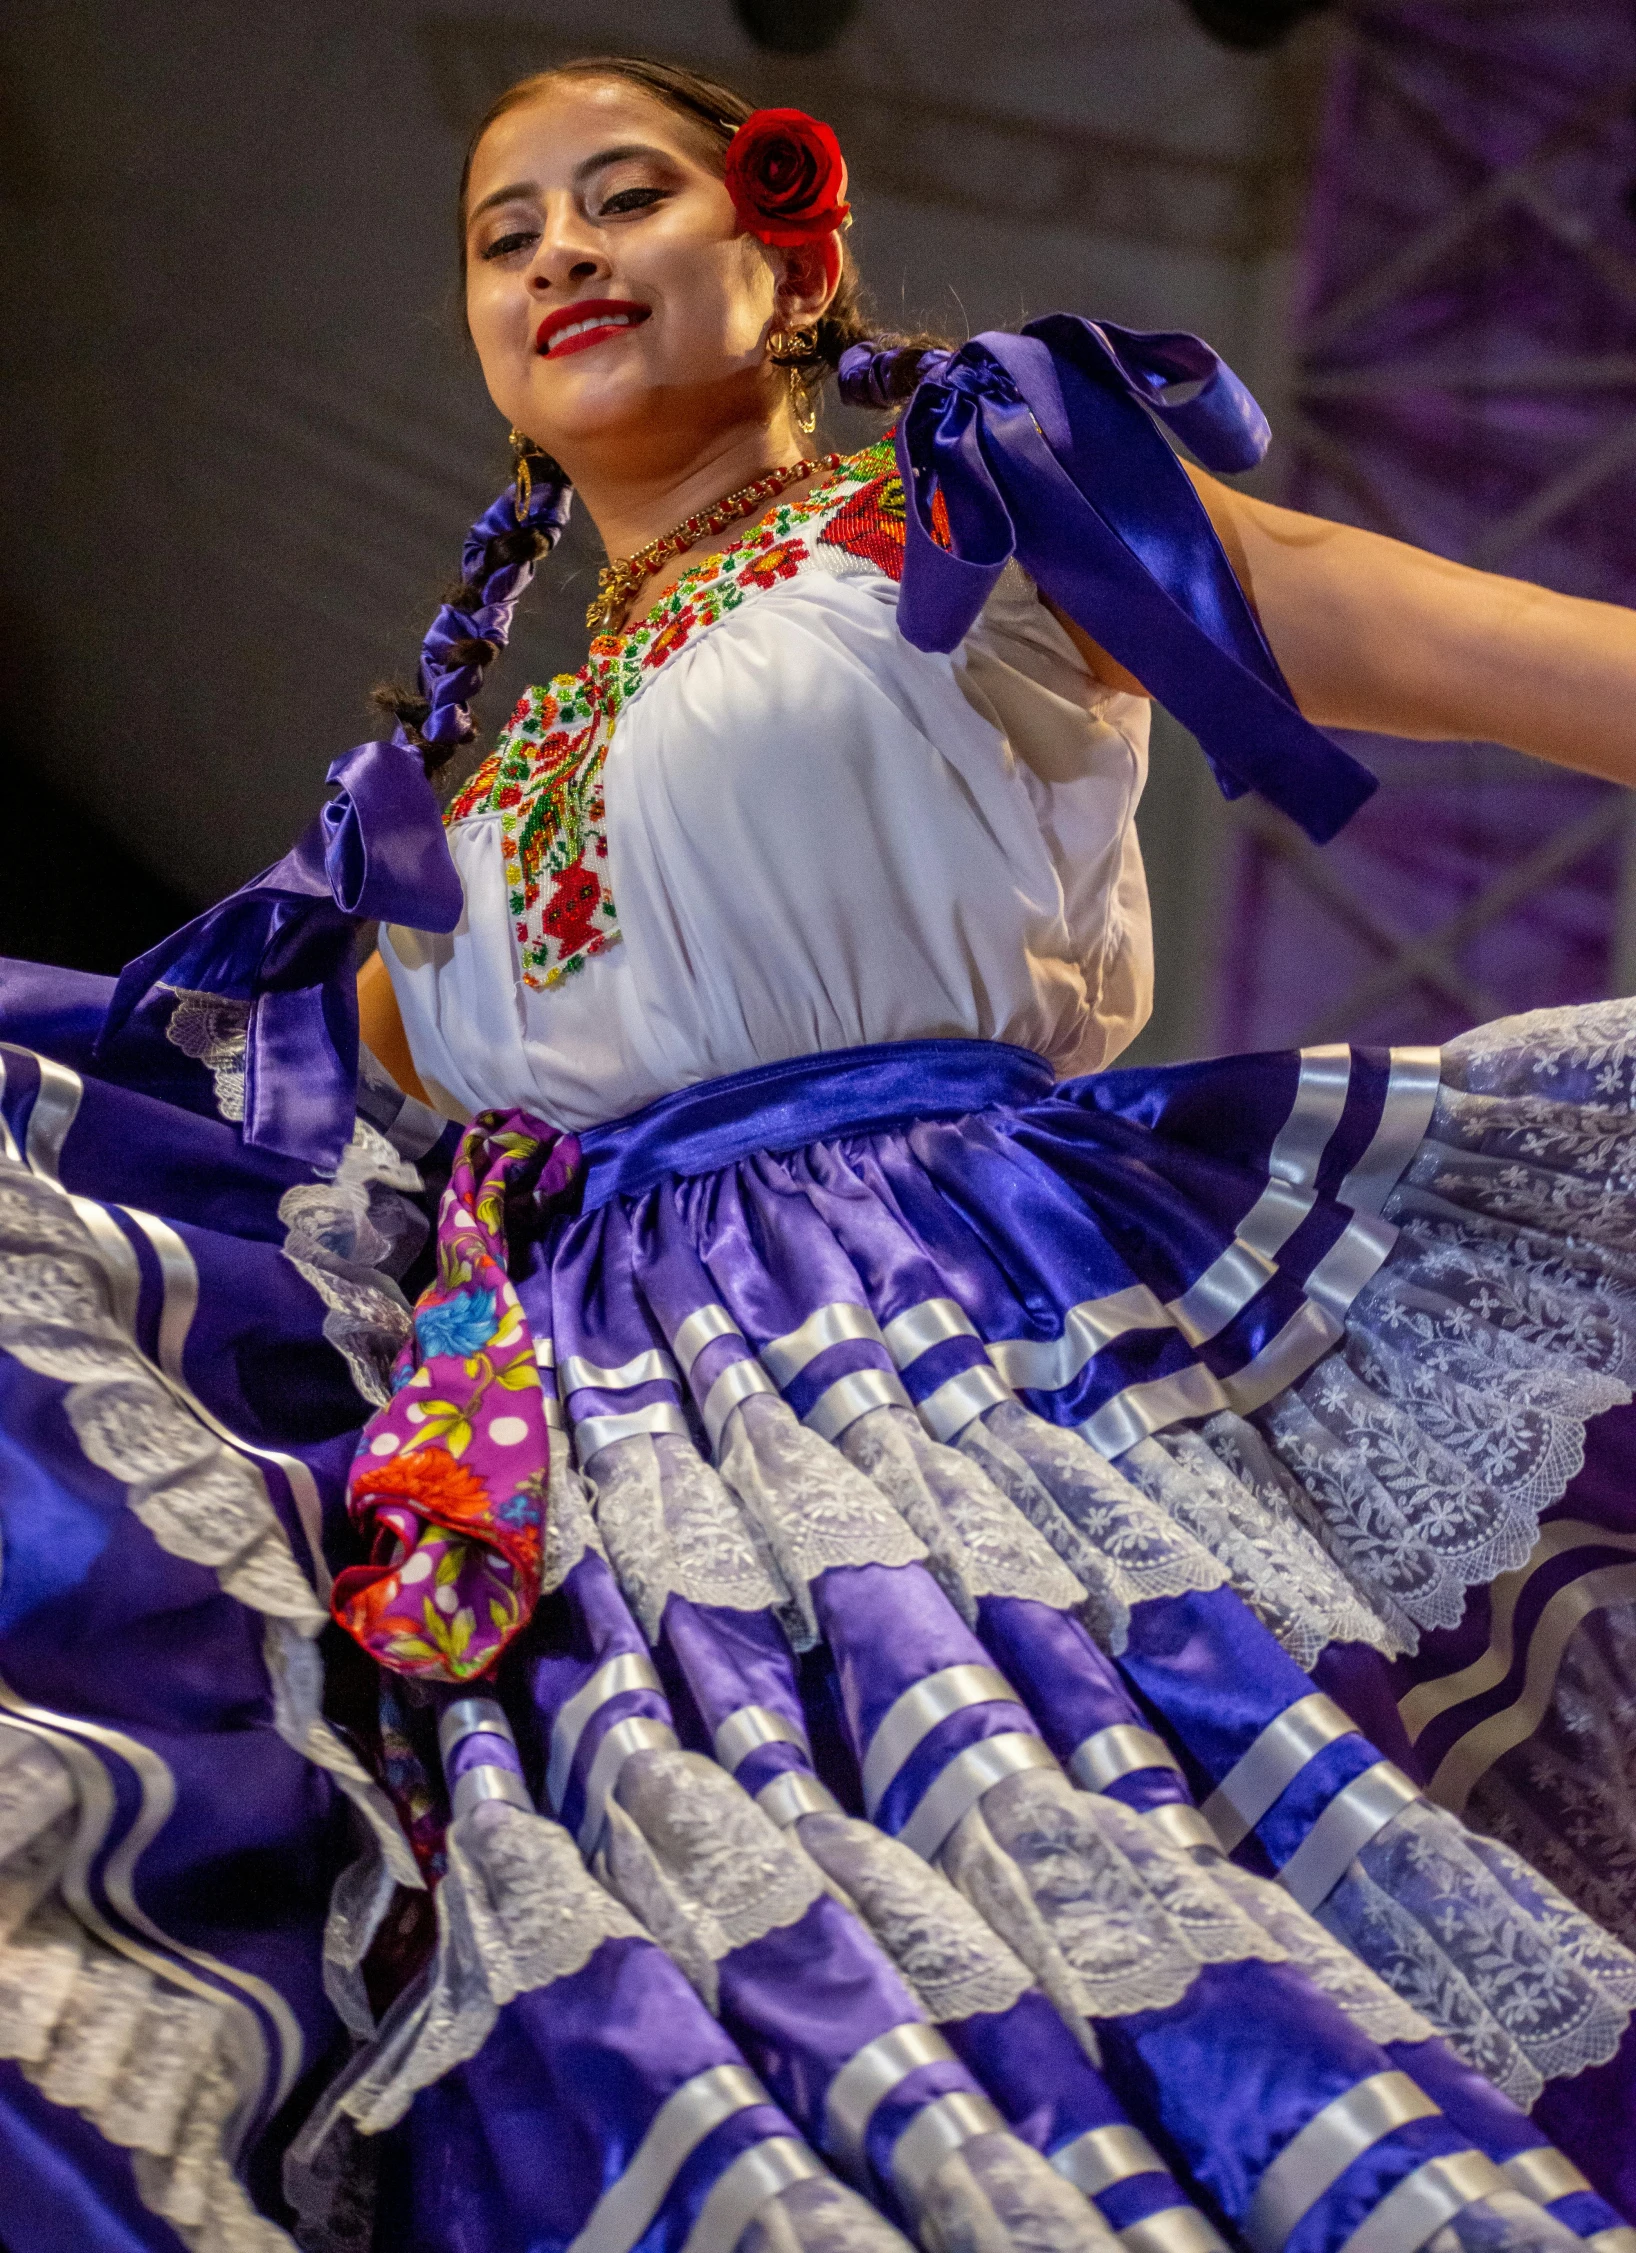 a woman in a dress with ribbons dancing on stage